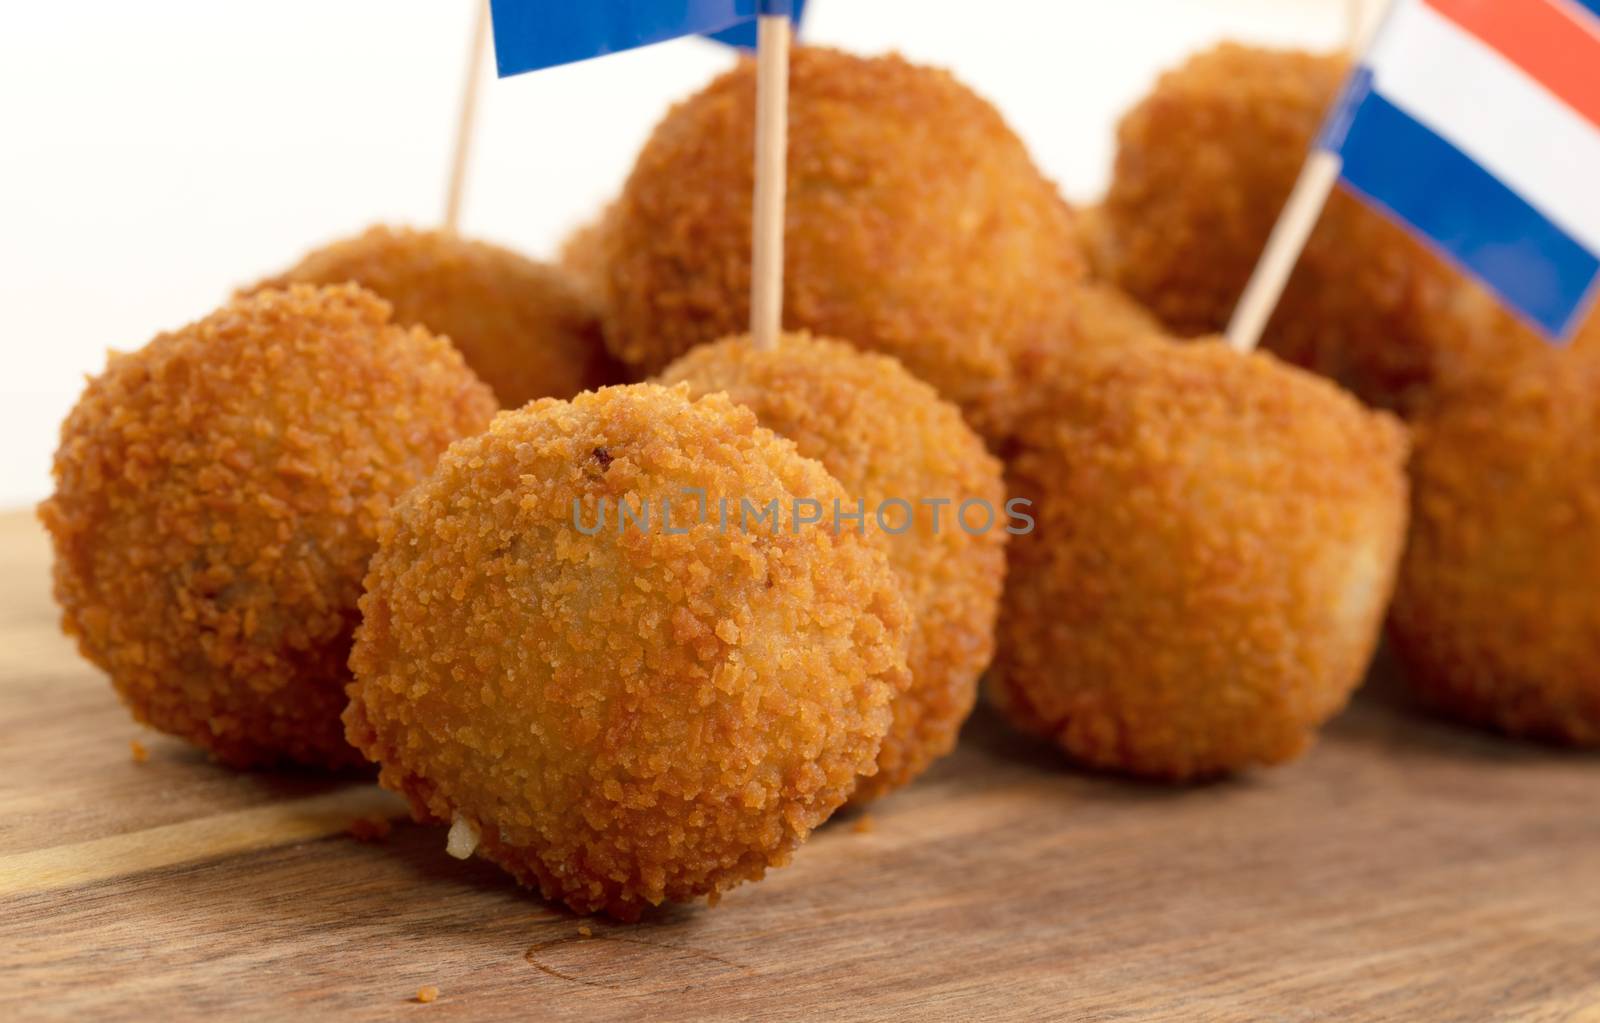 Dutch traditional snack bitterbal on a serving board, dutch flag, isolated